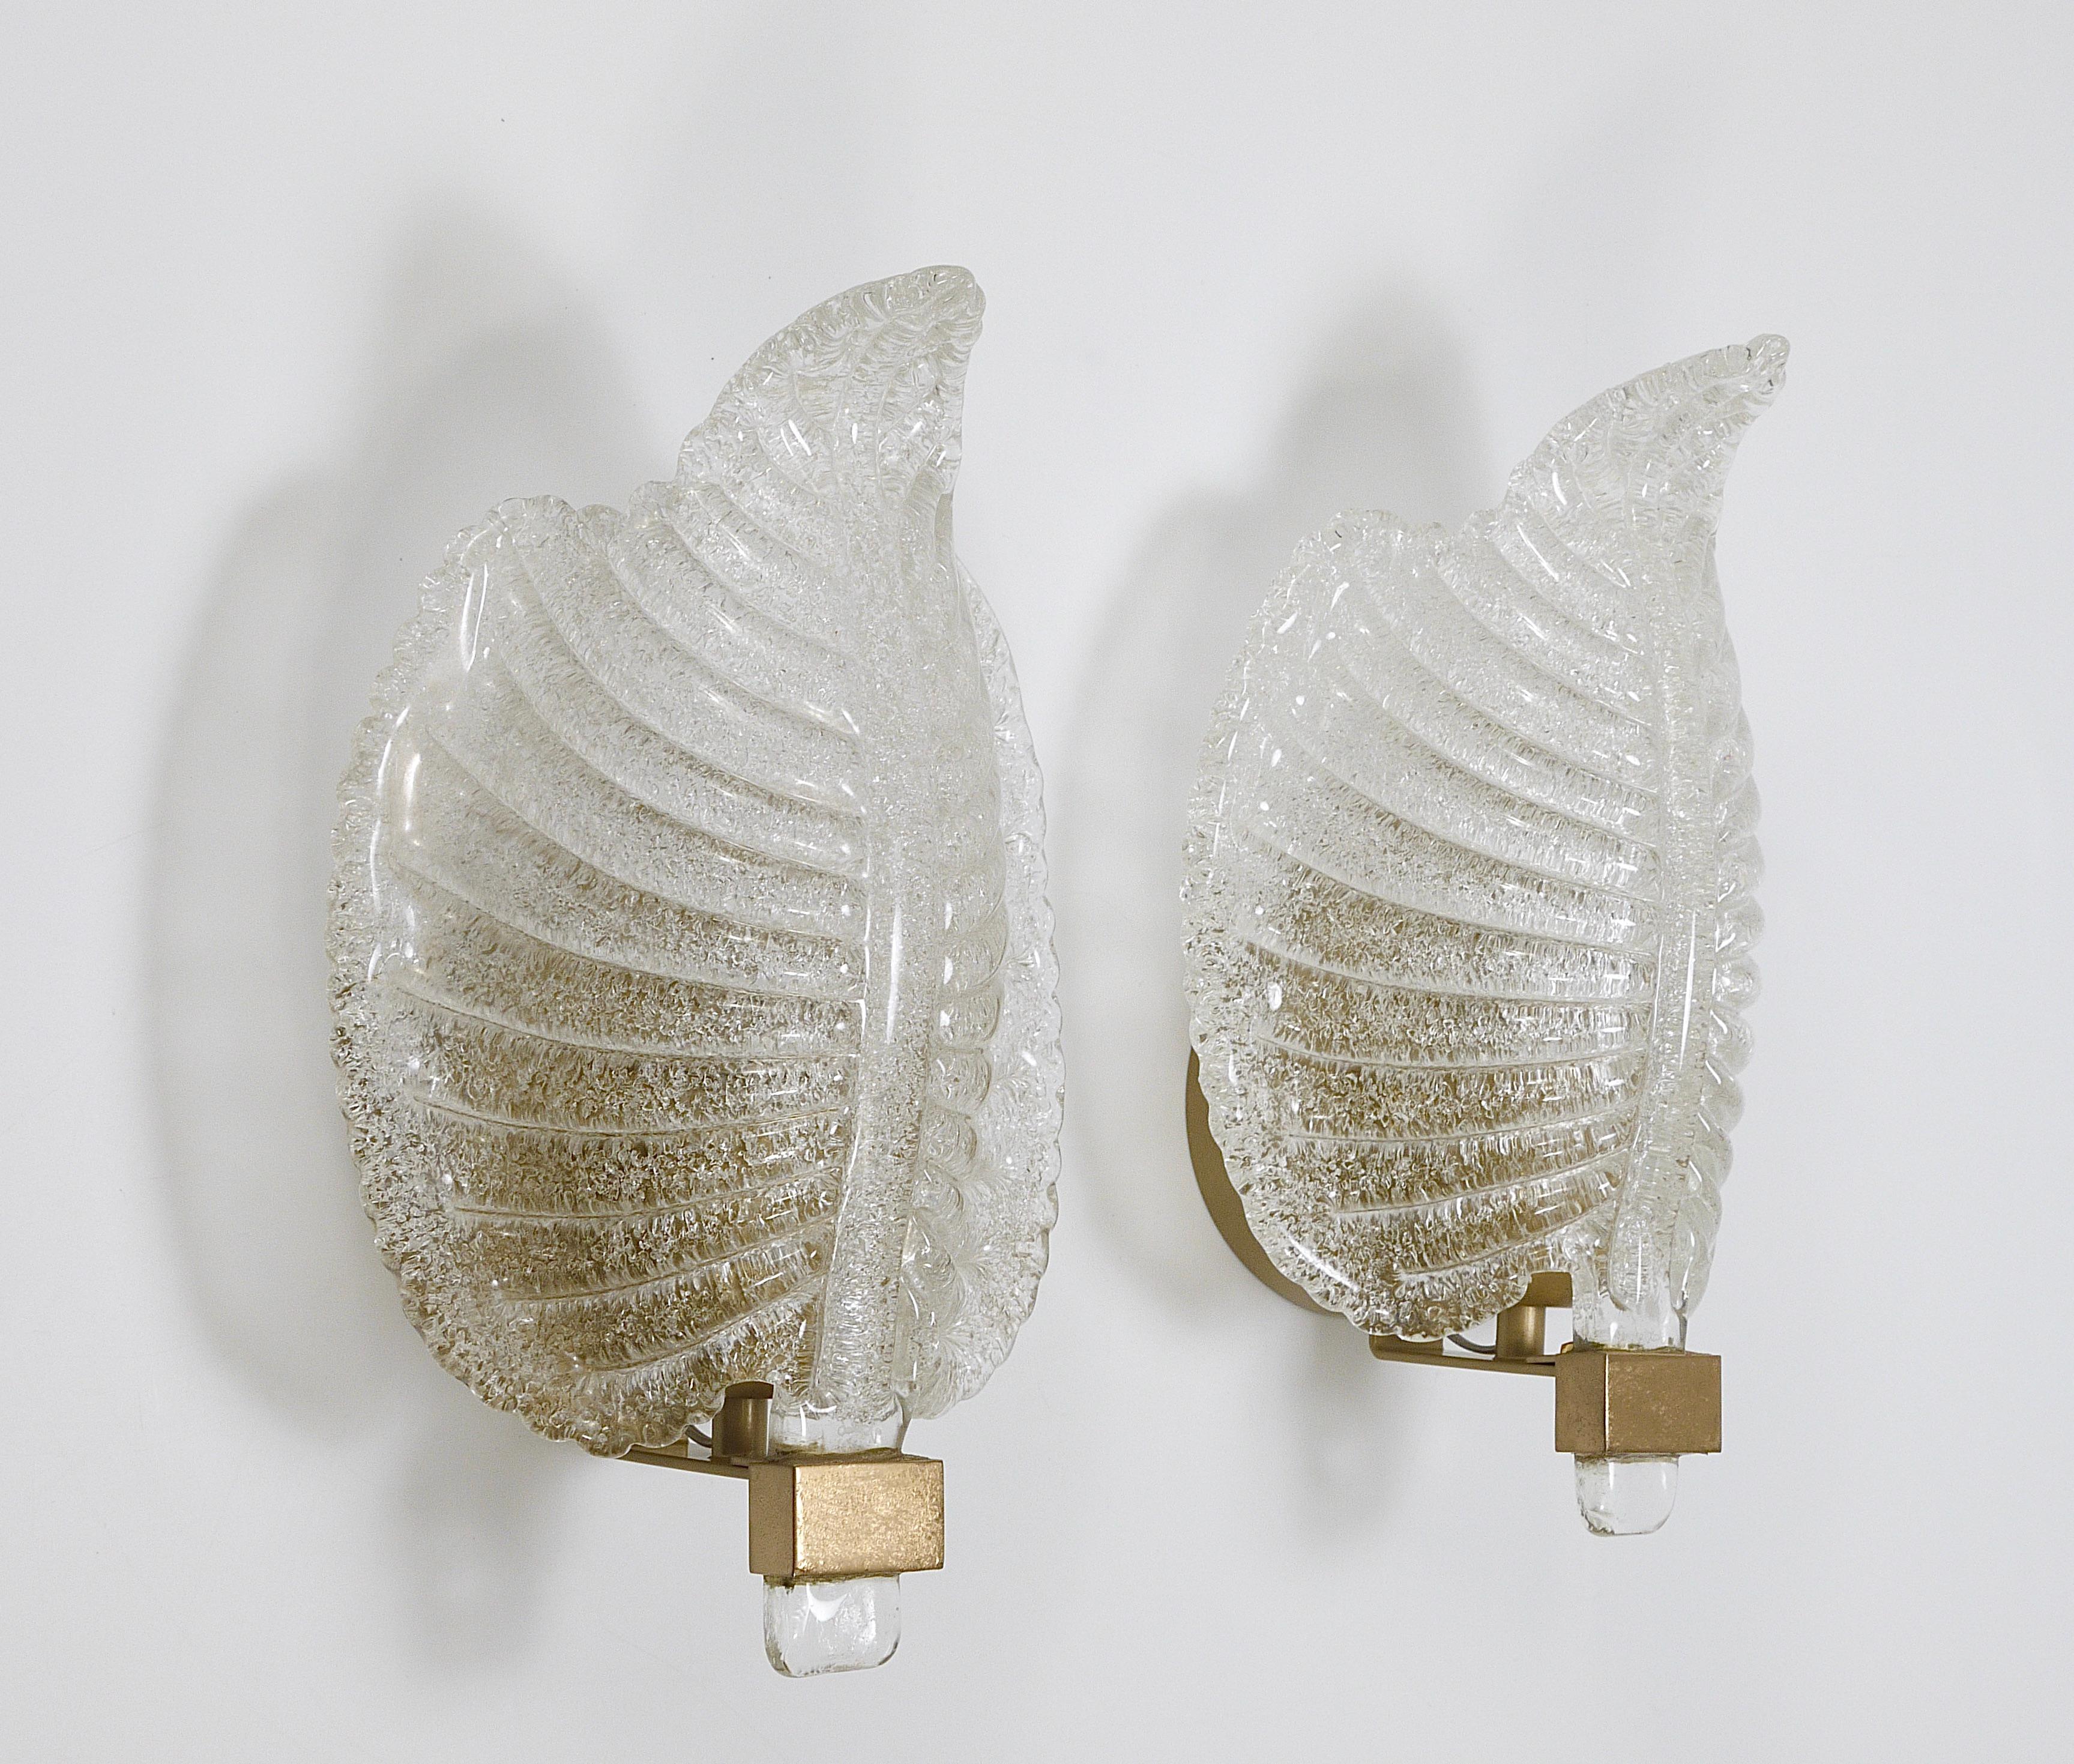 20th Century Barovier and Toso Style Venetian Murano Glass Leaf Sconces / Wall Lamps, Italy